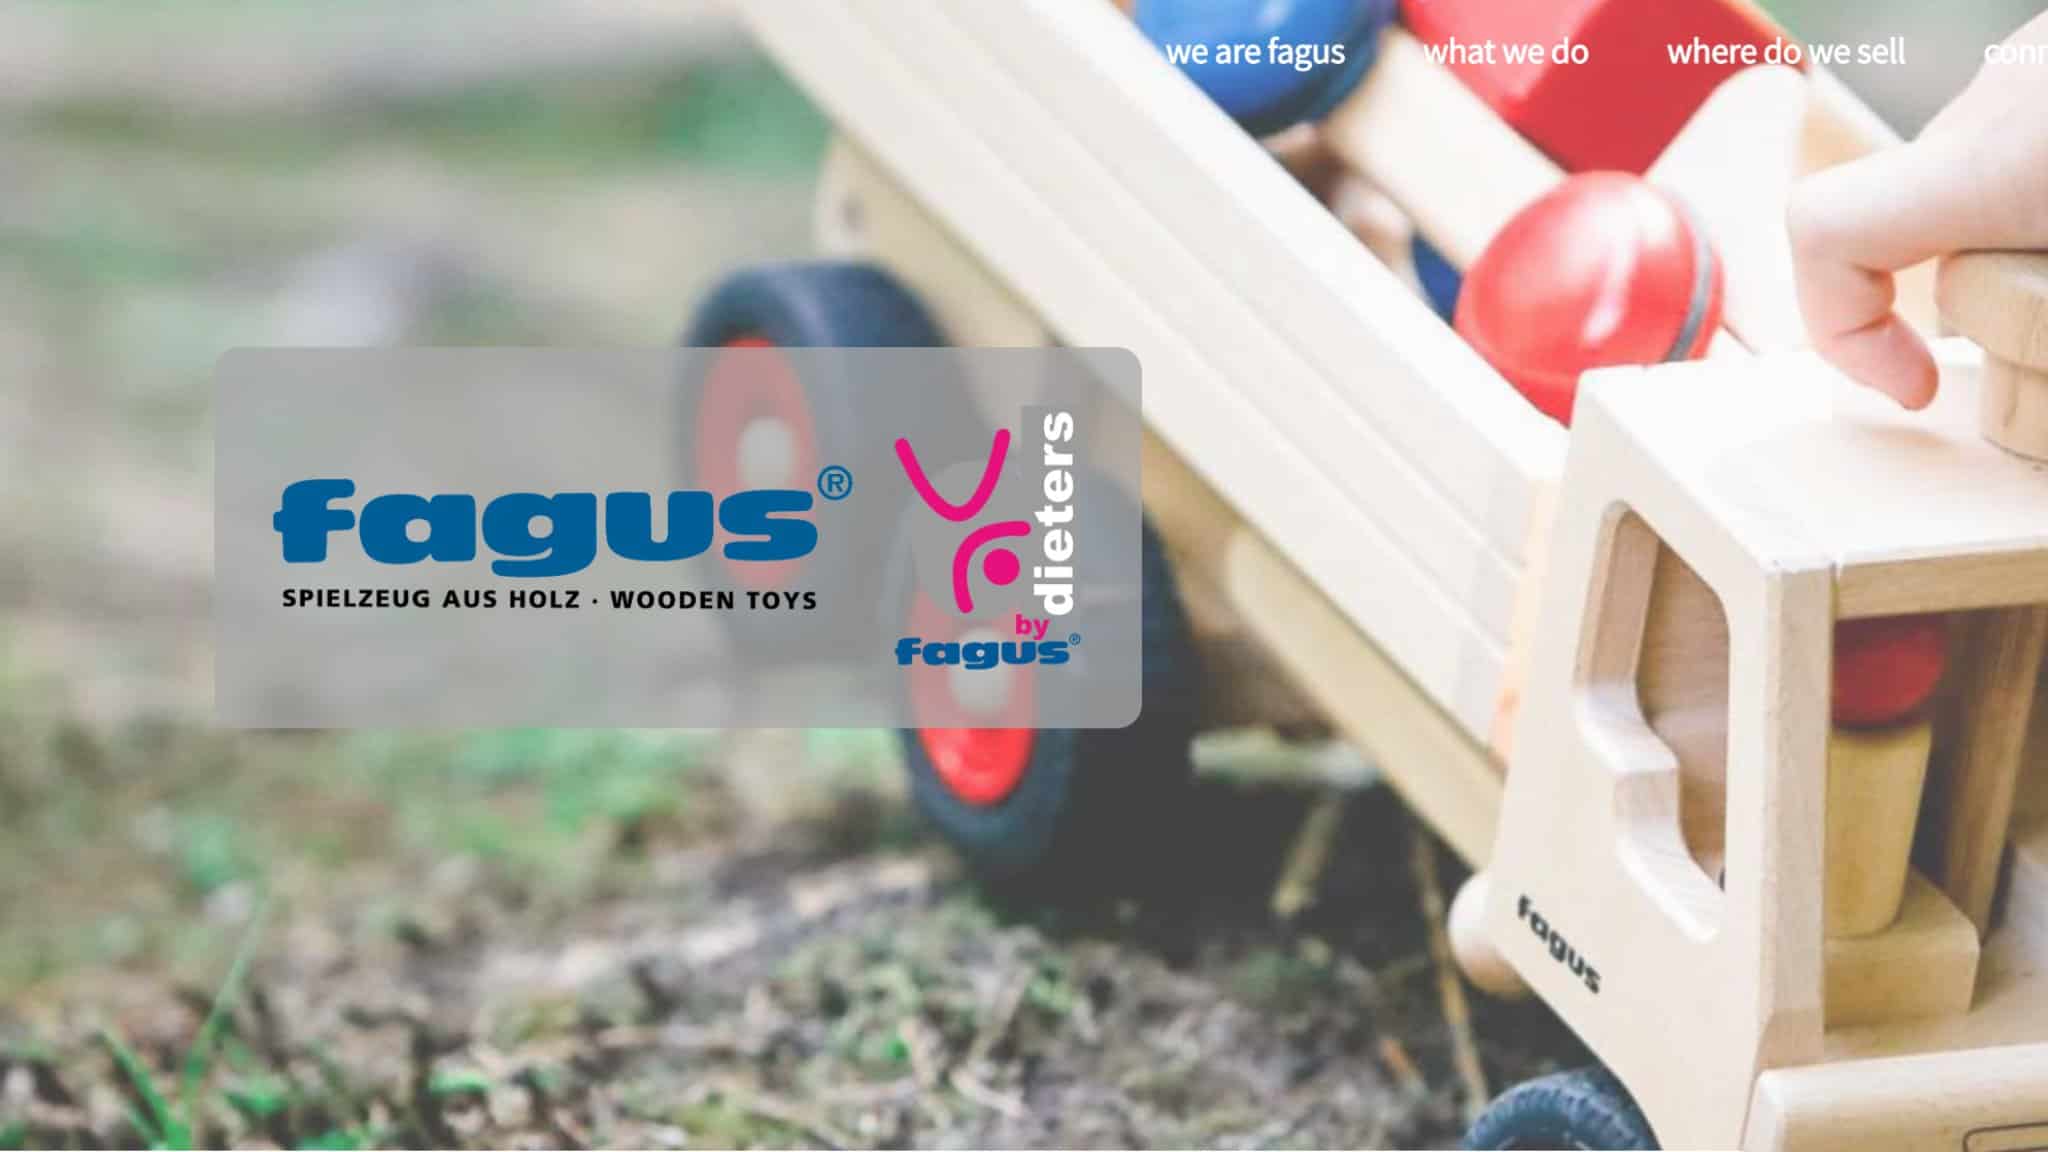 Fagus: The emergence of a natural wooden toy brand